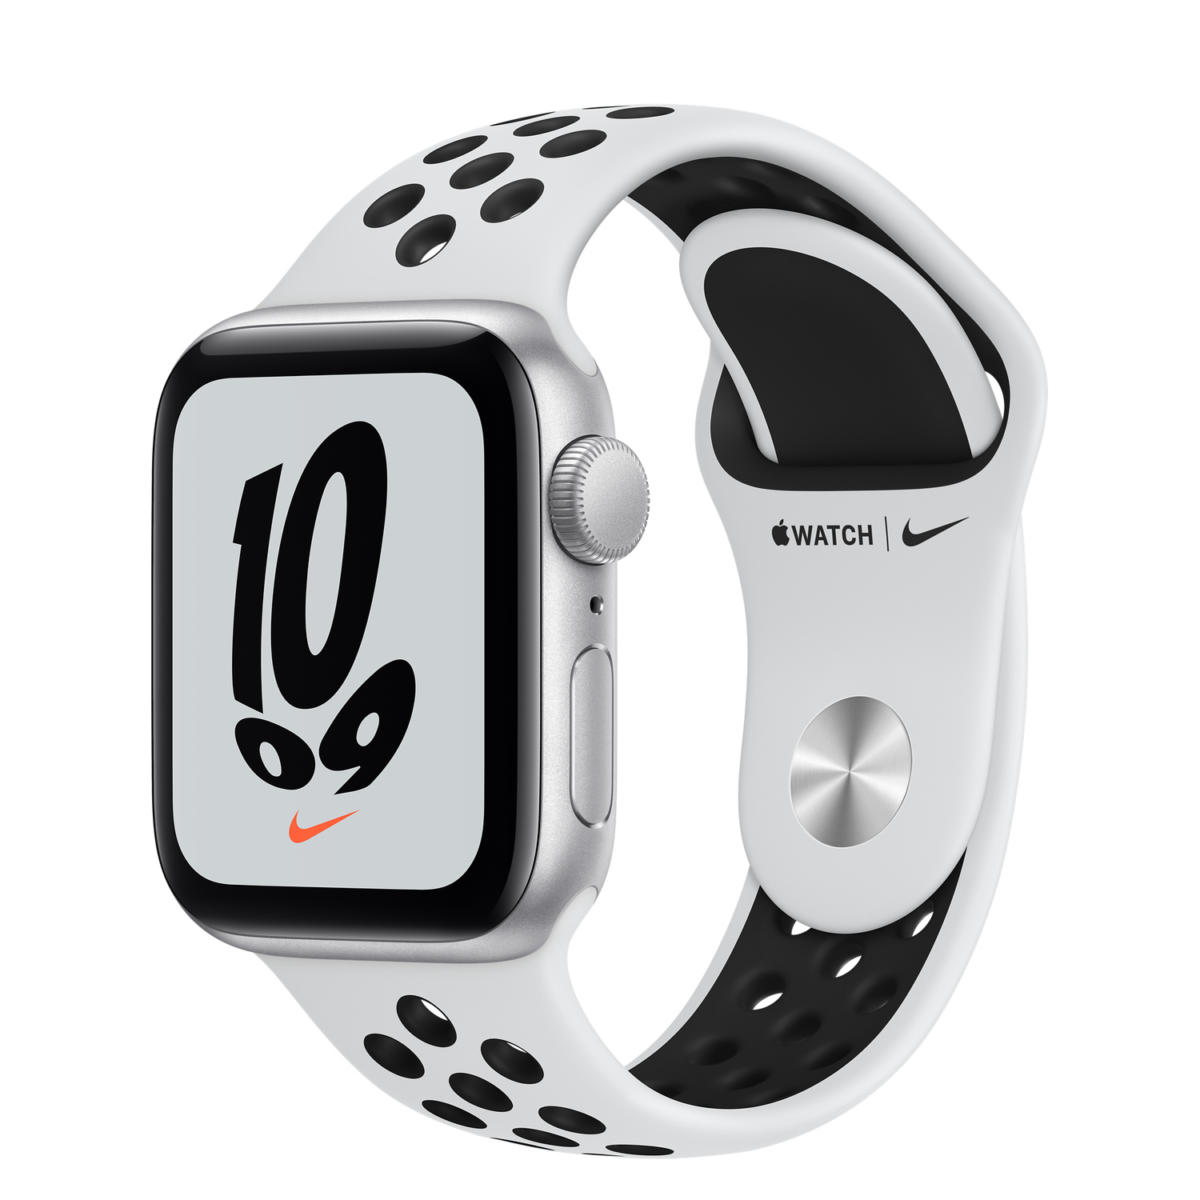 MKQ23LZ/A - $249 - Apple Watch Nike SE (GPS) 40mm Space Gray